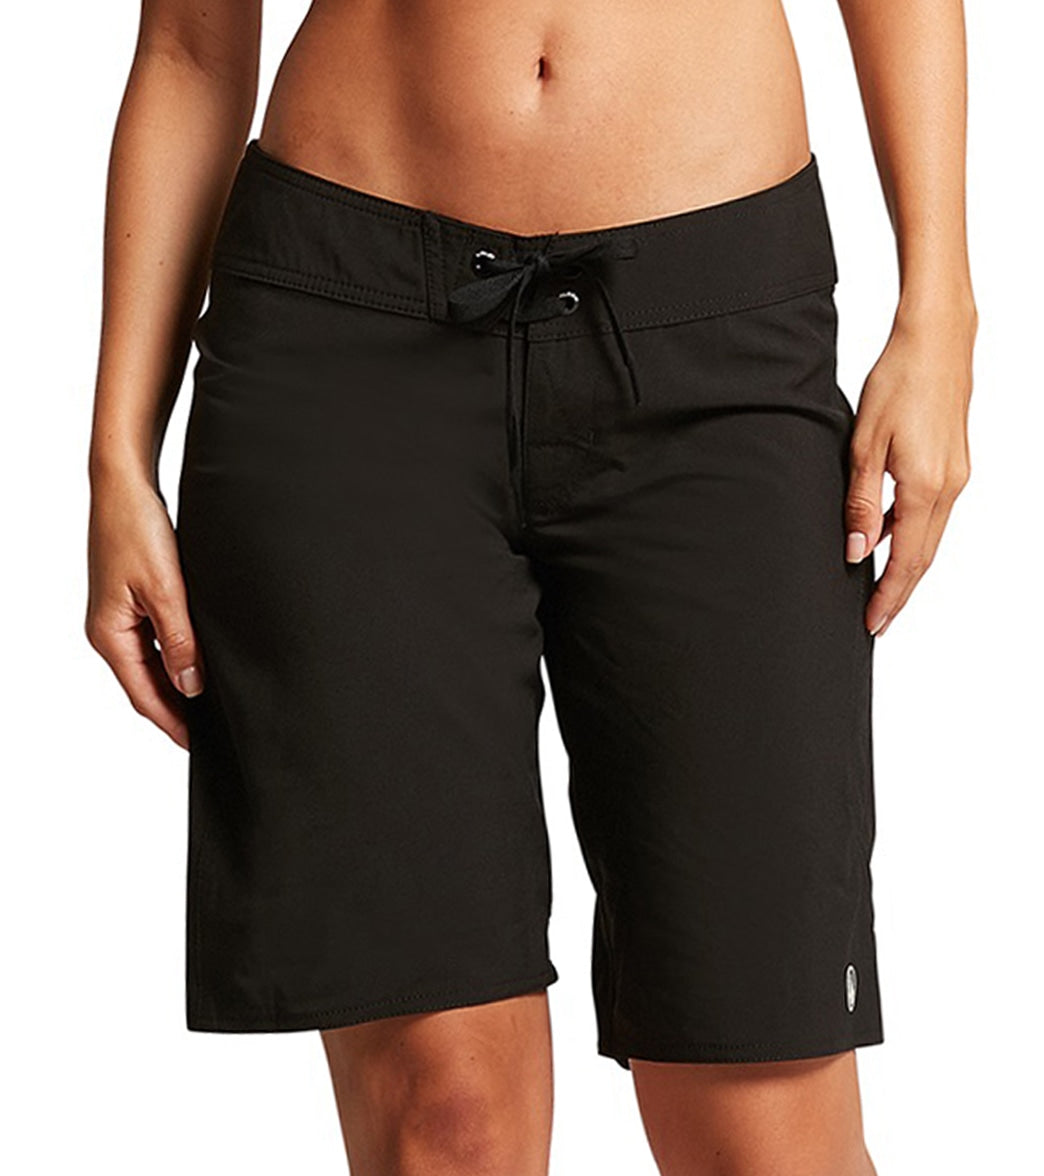 Volcom Women's Simply Solid 11" Boardshort at SwimOutlet.com